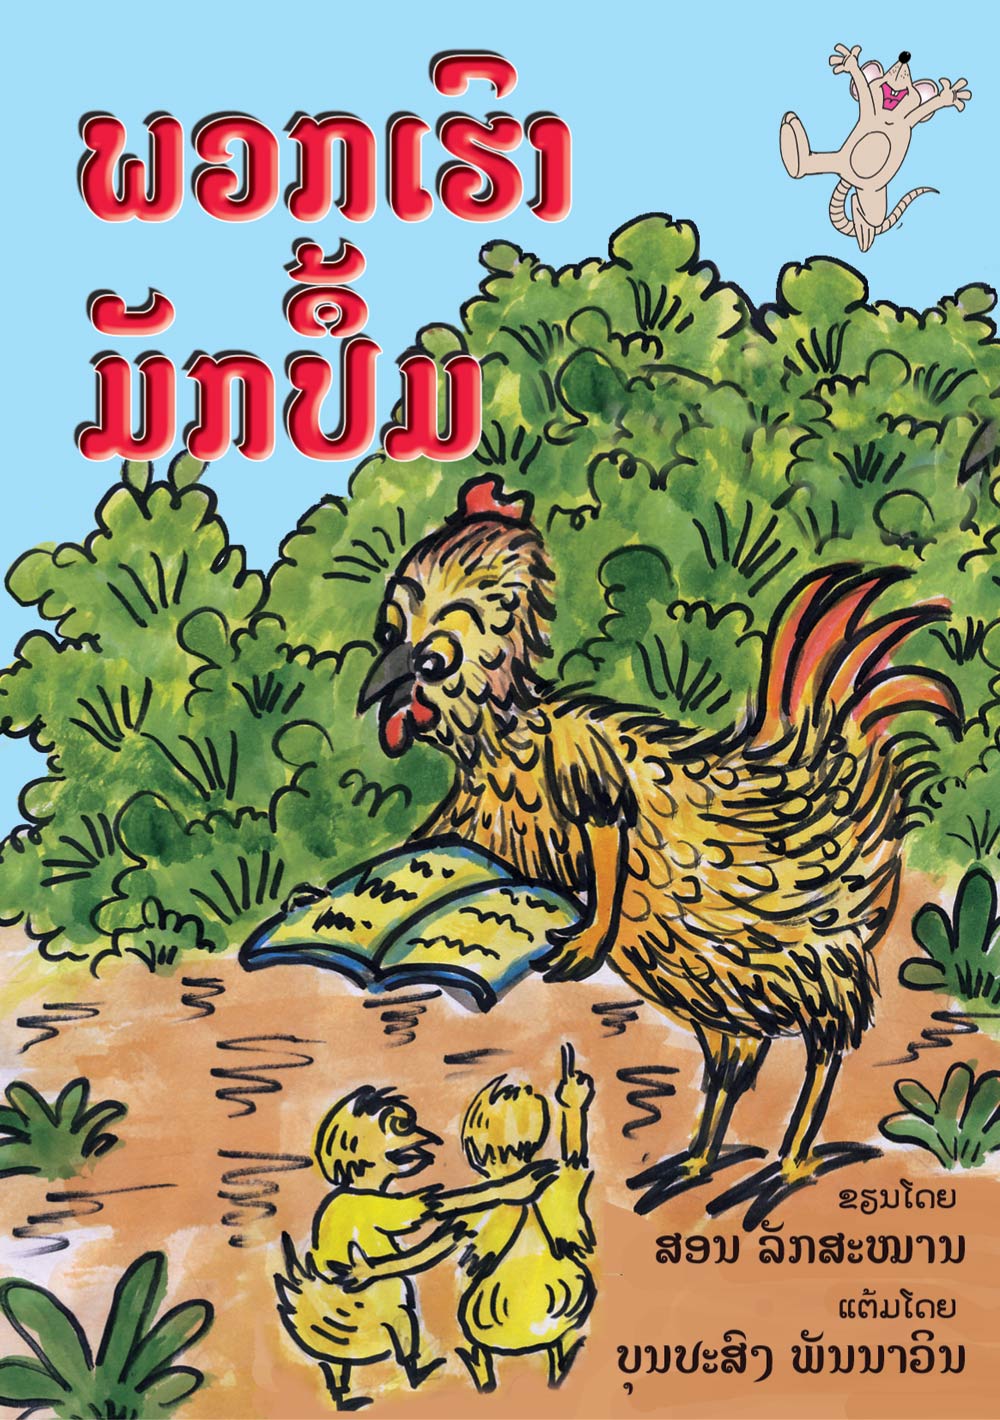 We Love Books! large book cover, published in Lao language